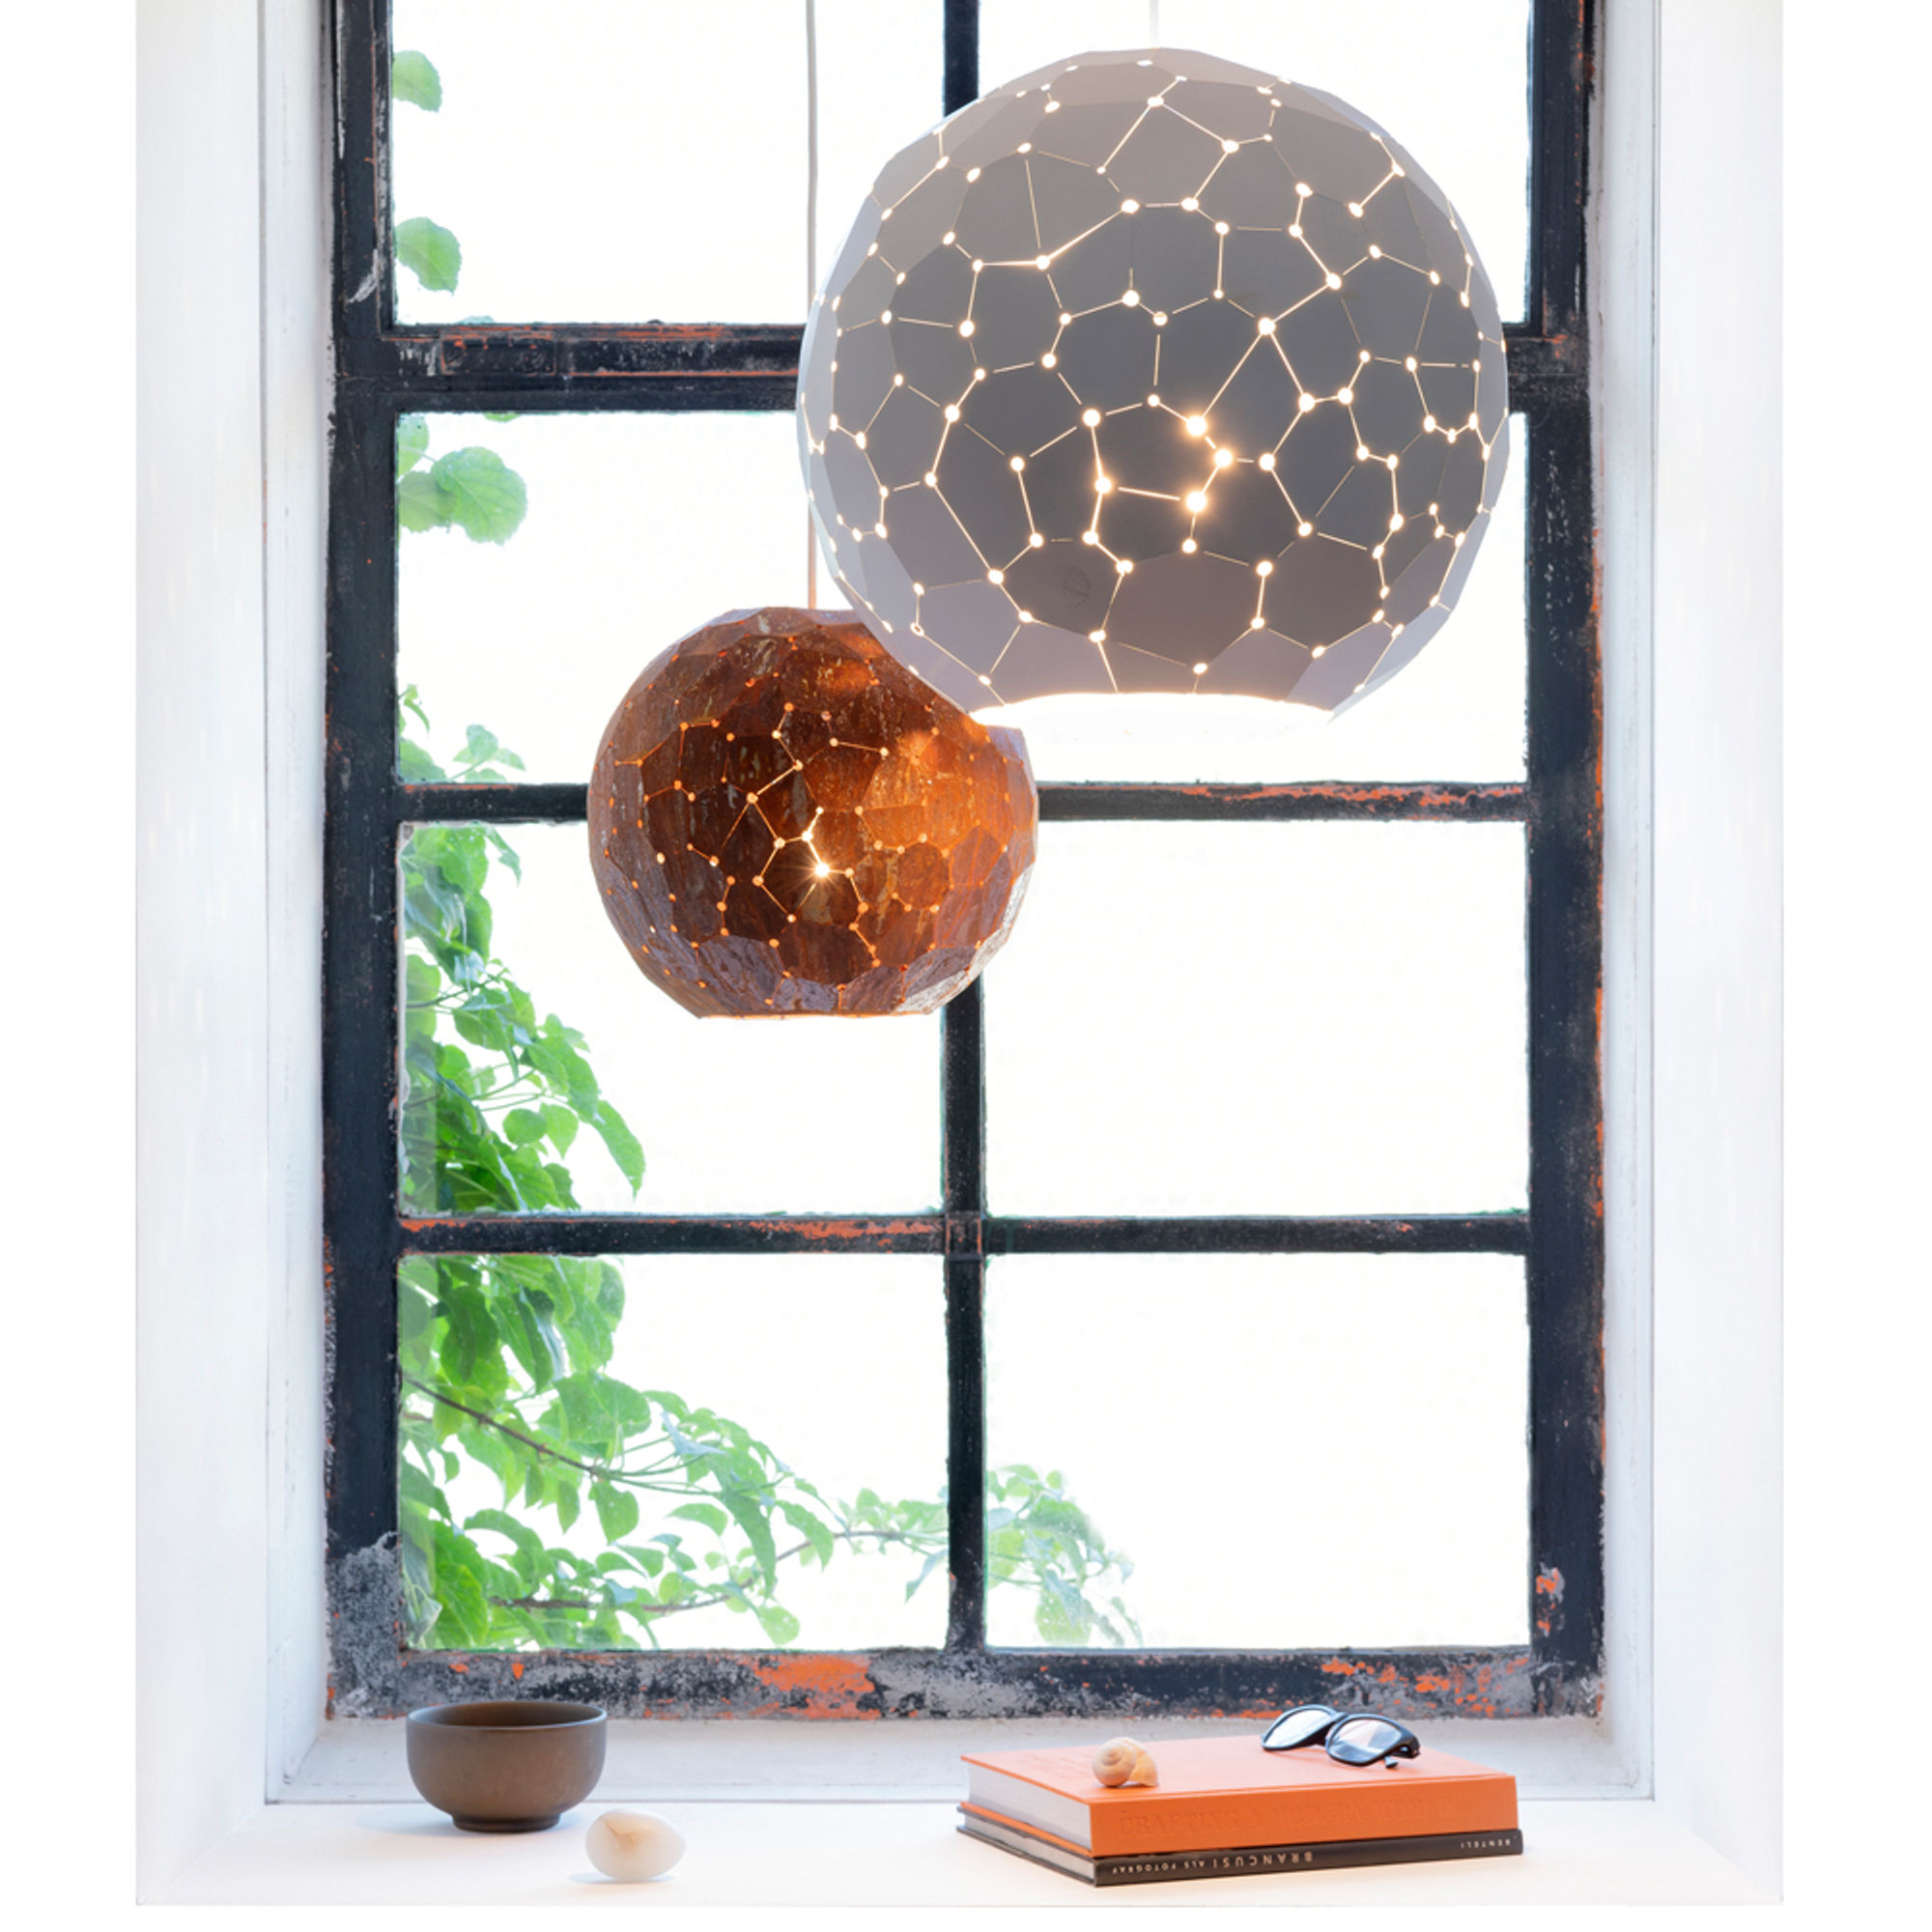 The StarDust 90 Pendant by By Marc de Groot 1